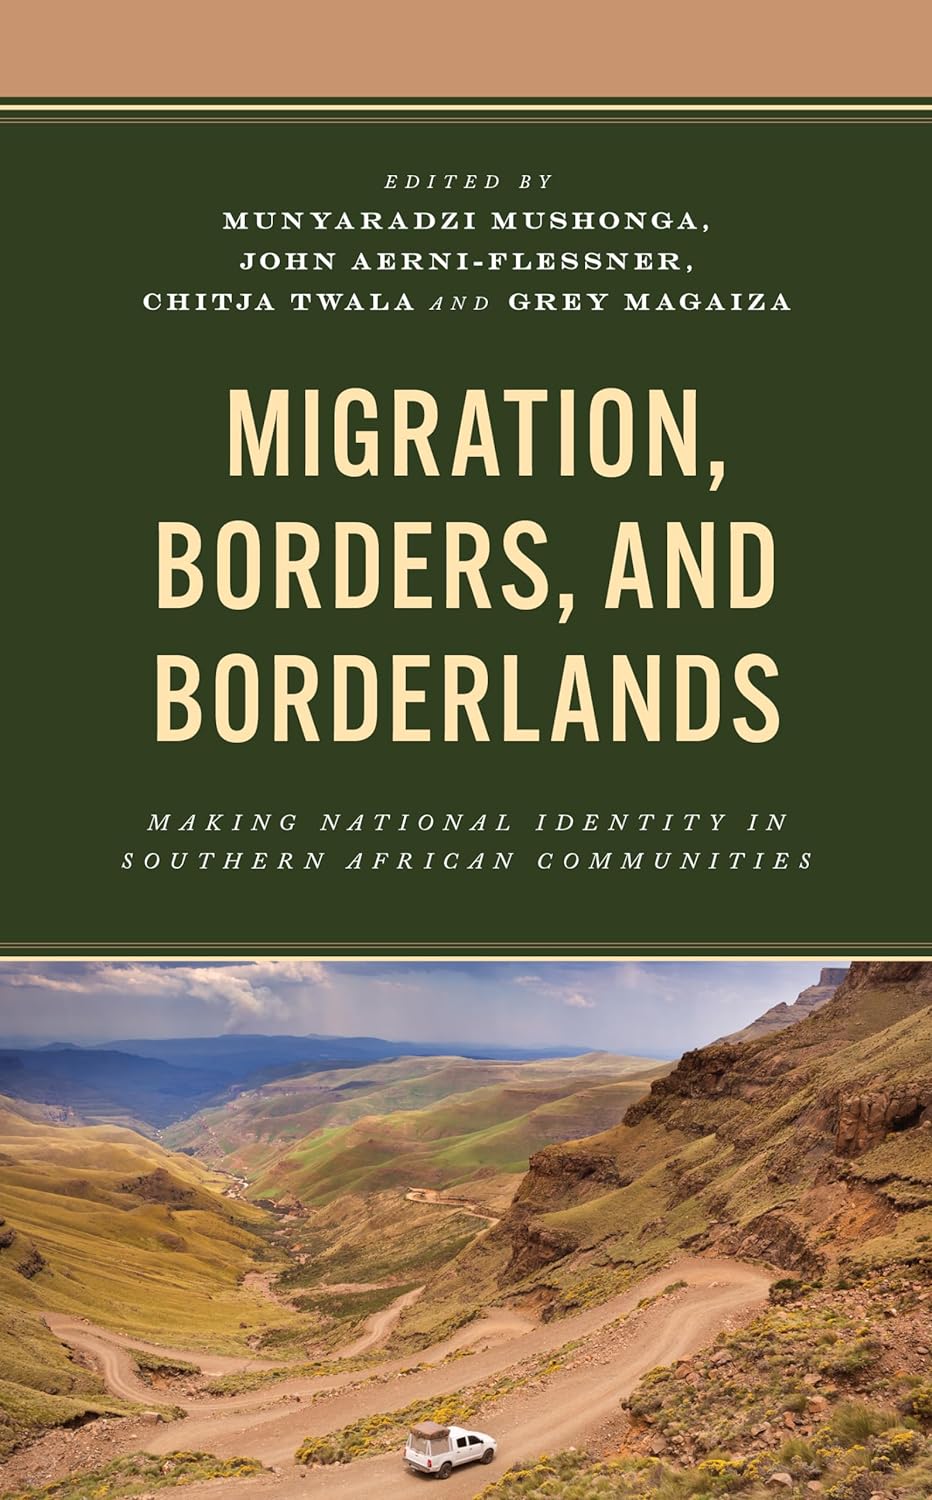 Book on South African Border Policies Co-Edited by RCAH’s John Aerni-Flessner